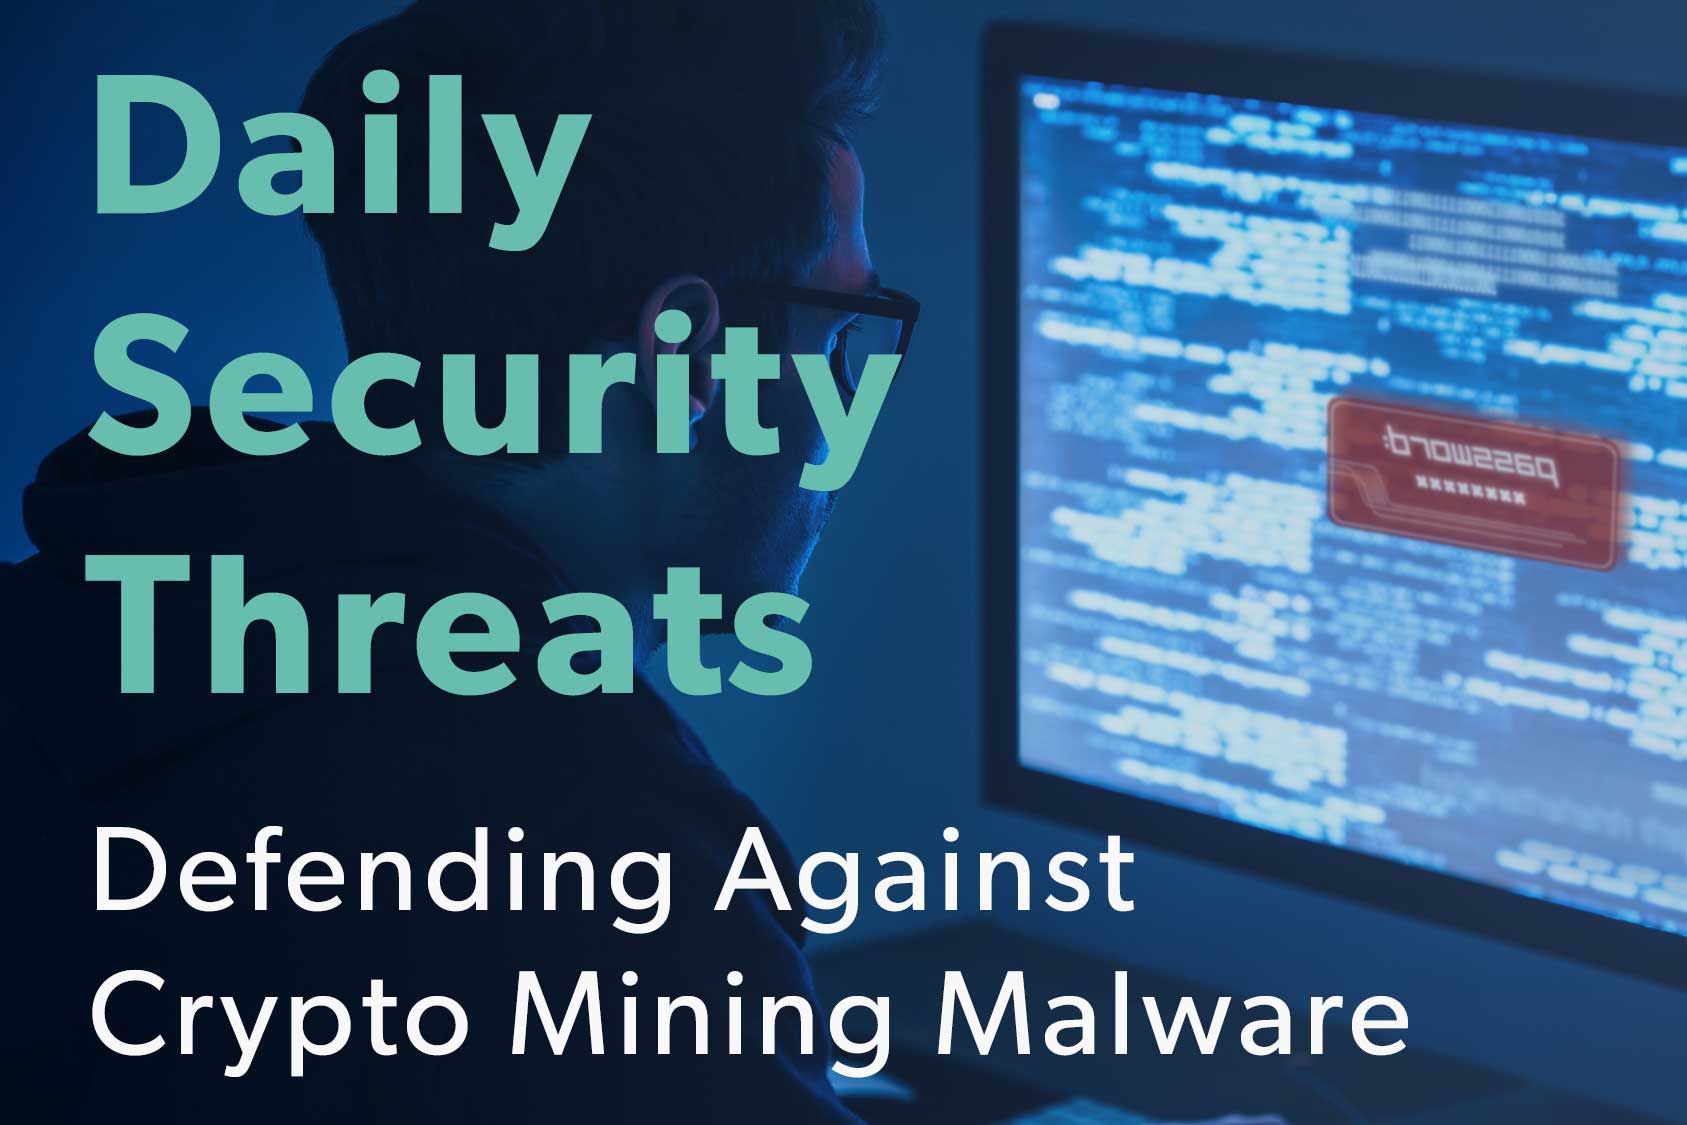 Daily Security Threats: Defending Against Crypto Mining Malware